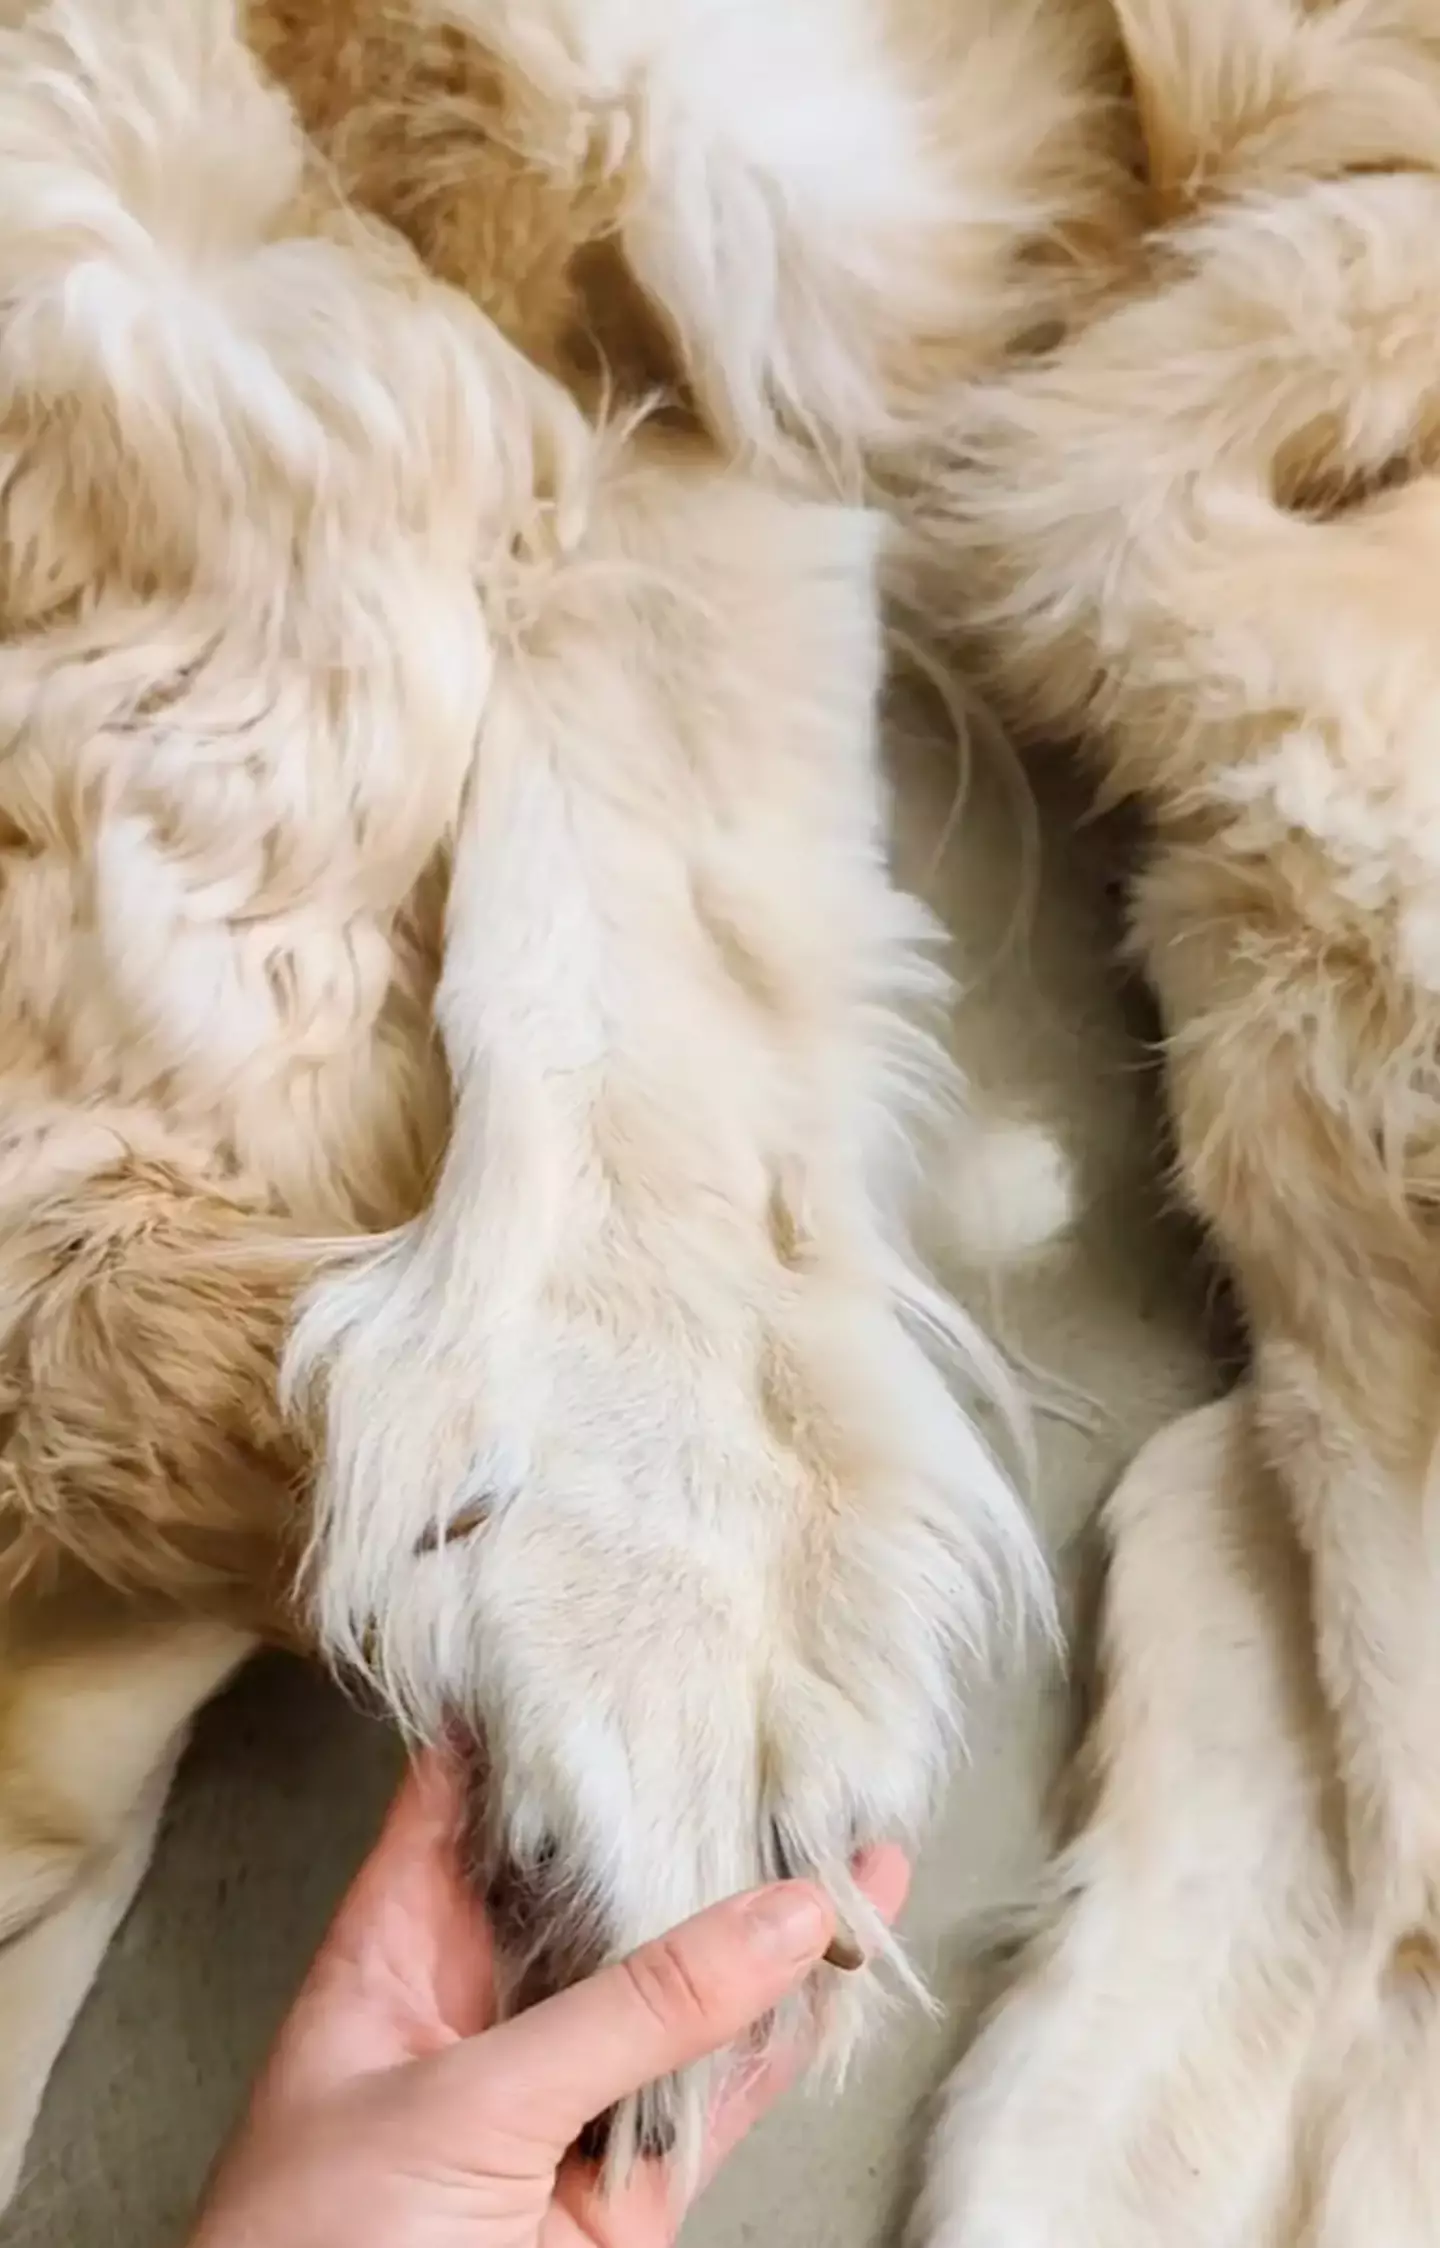 The fur even features the pup's claws.